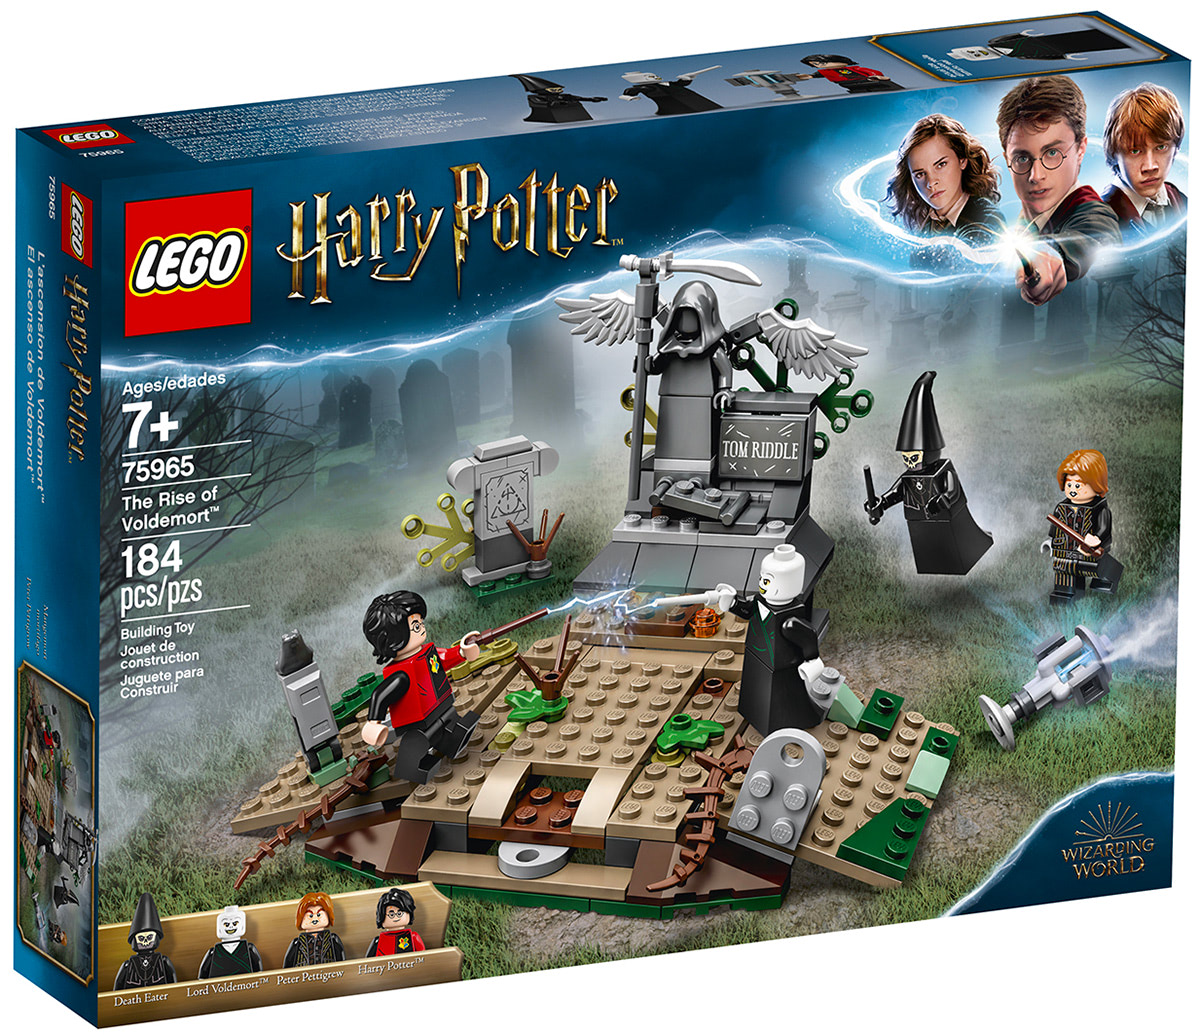 The Rise of Voldemort (75965)